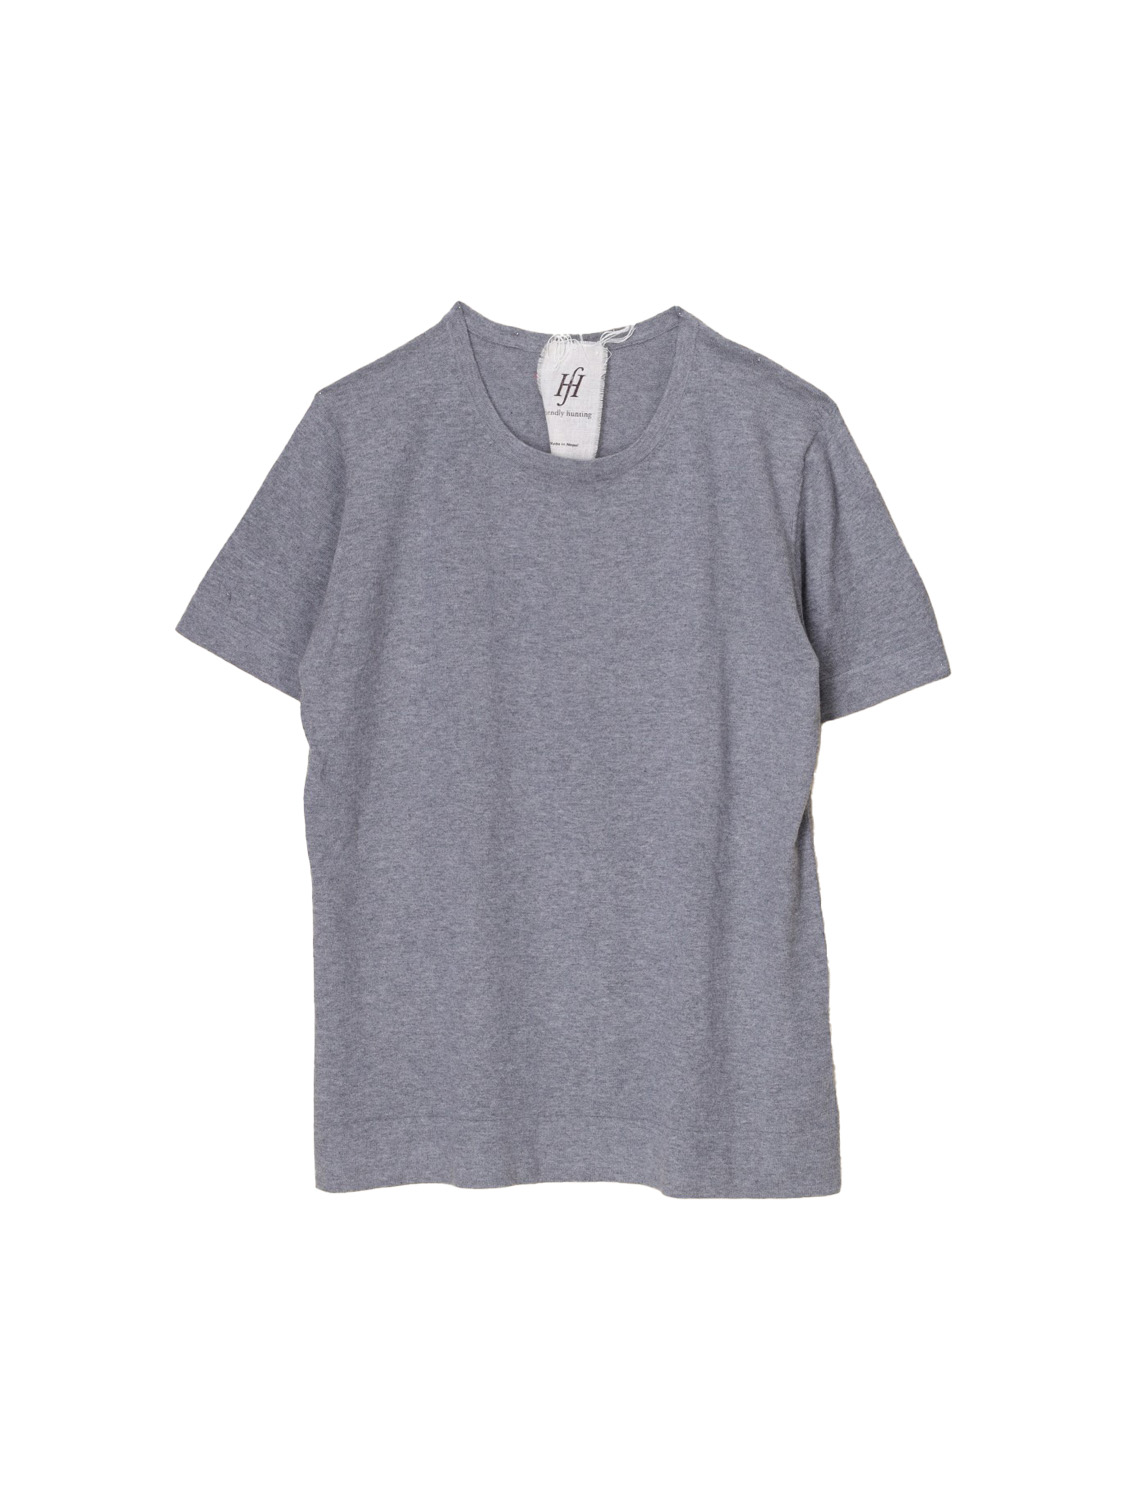 friendly hunting CC Uni – shirt made from a cotton-cashmere mix  grey S